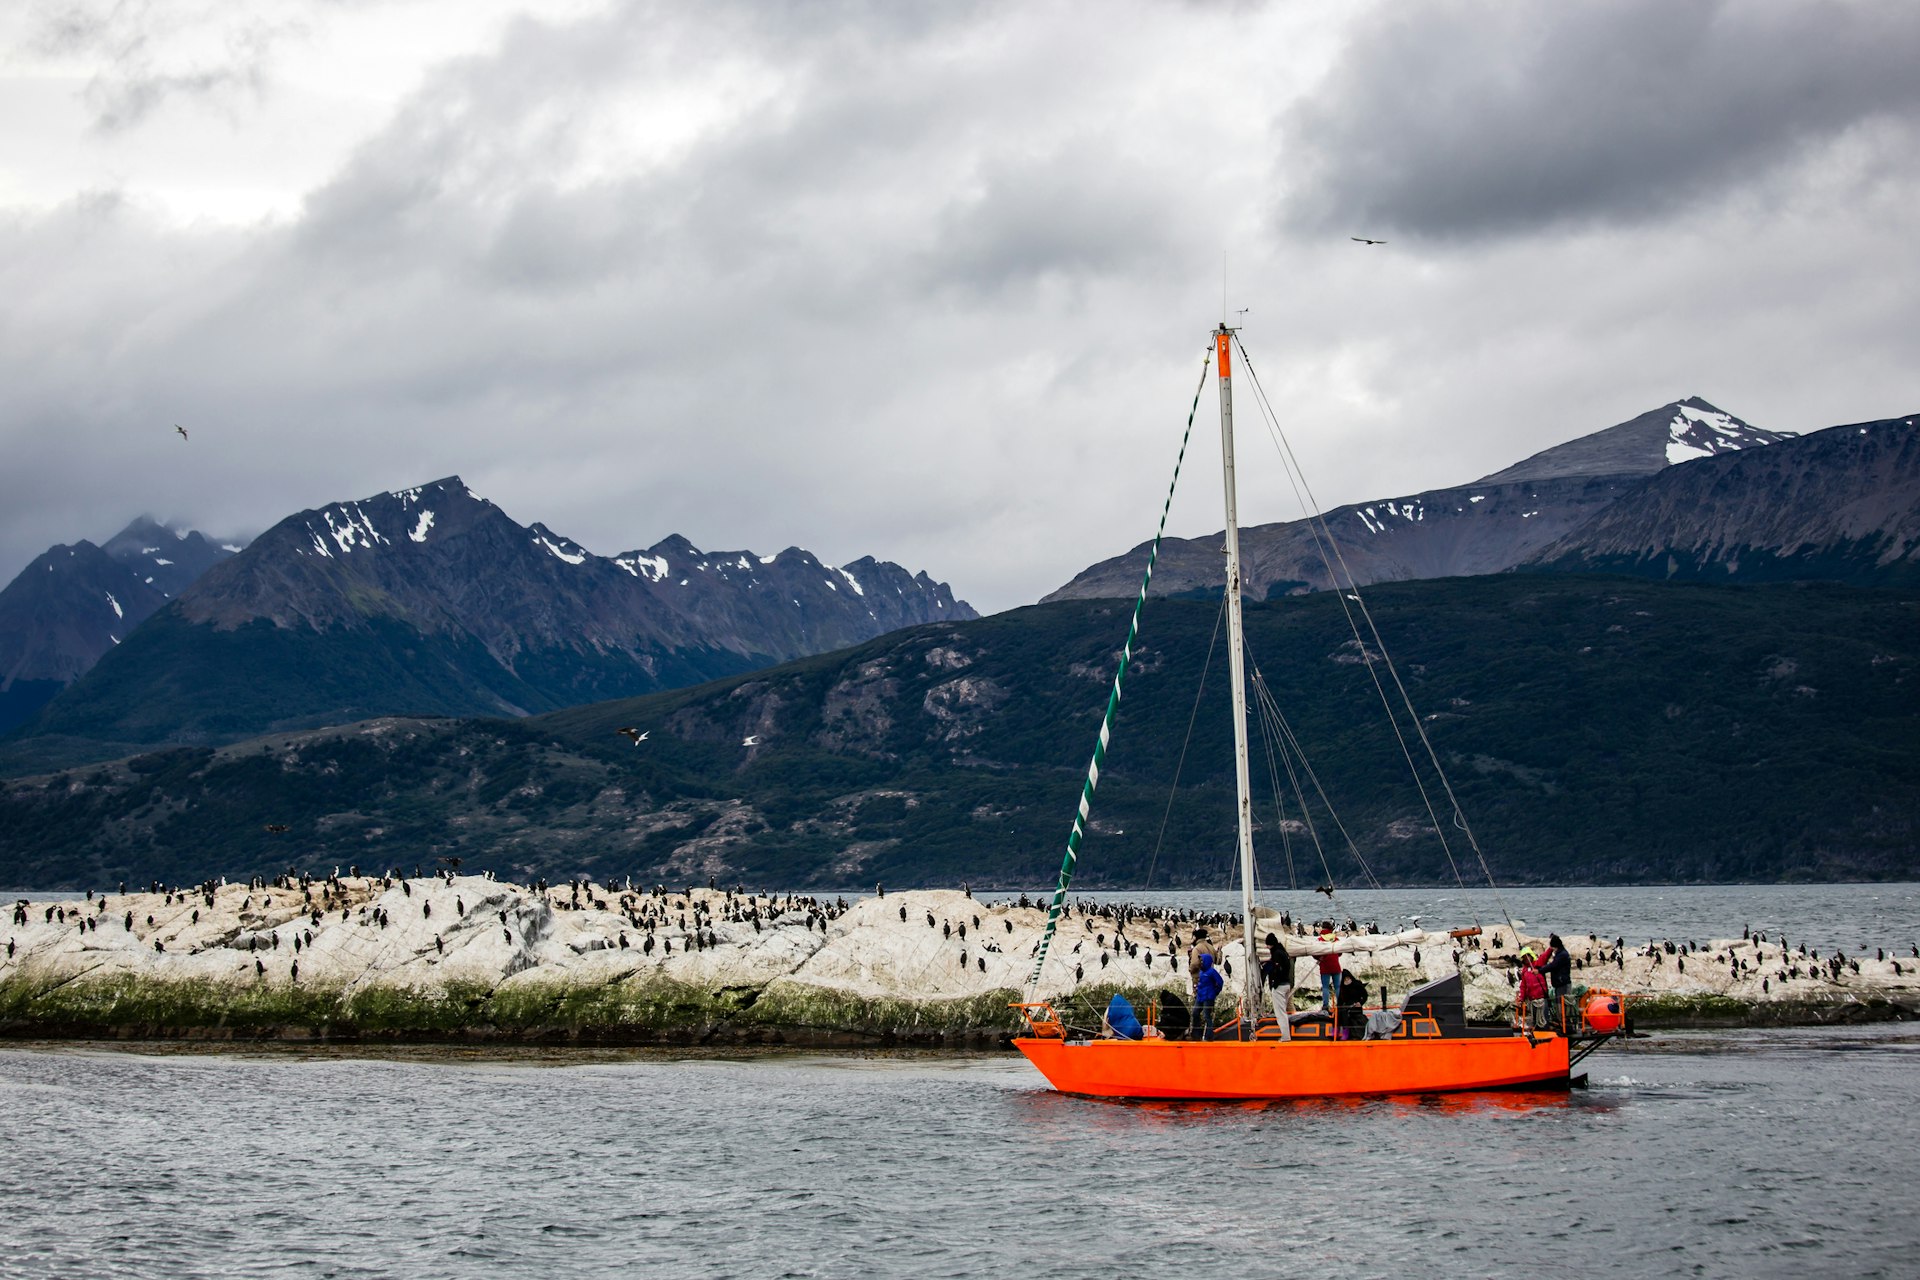 A bright orange sailboat visiting the Beagle Channel, with rocky islands inhabited by cormorants